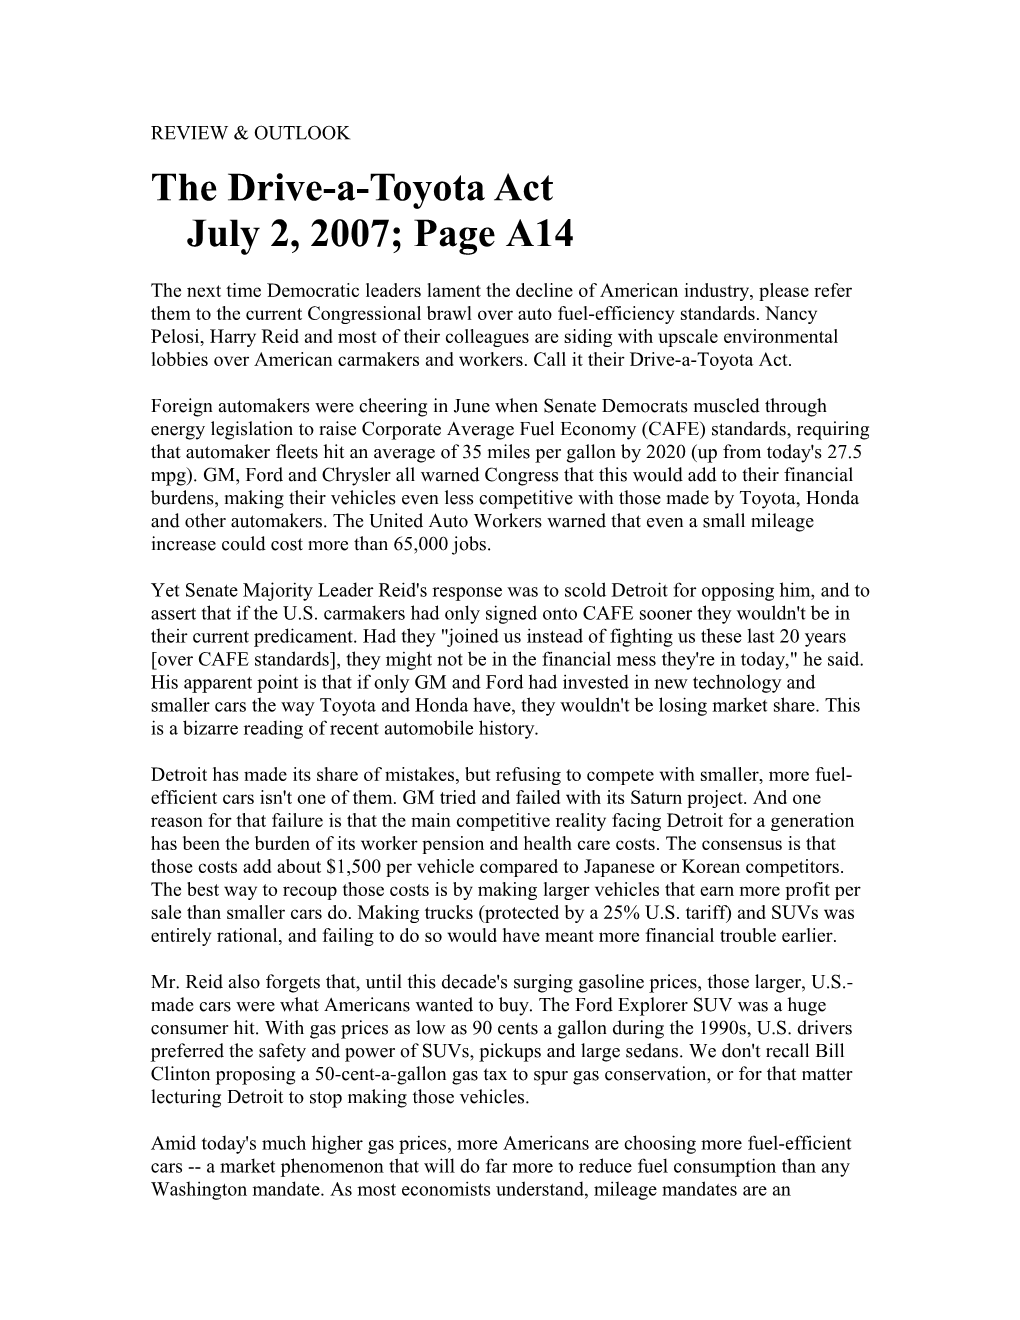 The Drive-A-Toyota Actjuly 2, 2007;Pagea14